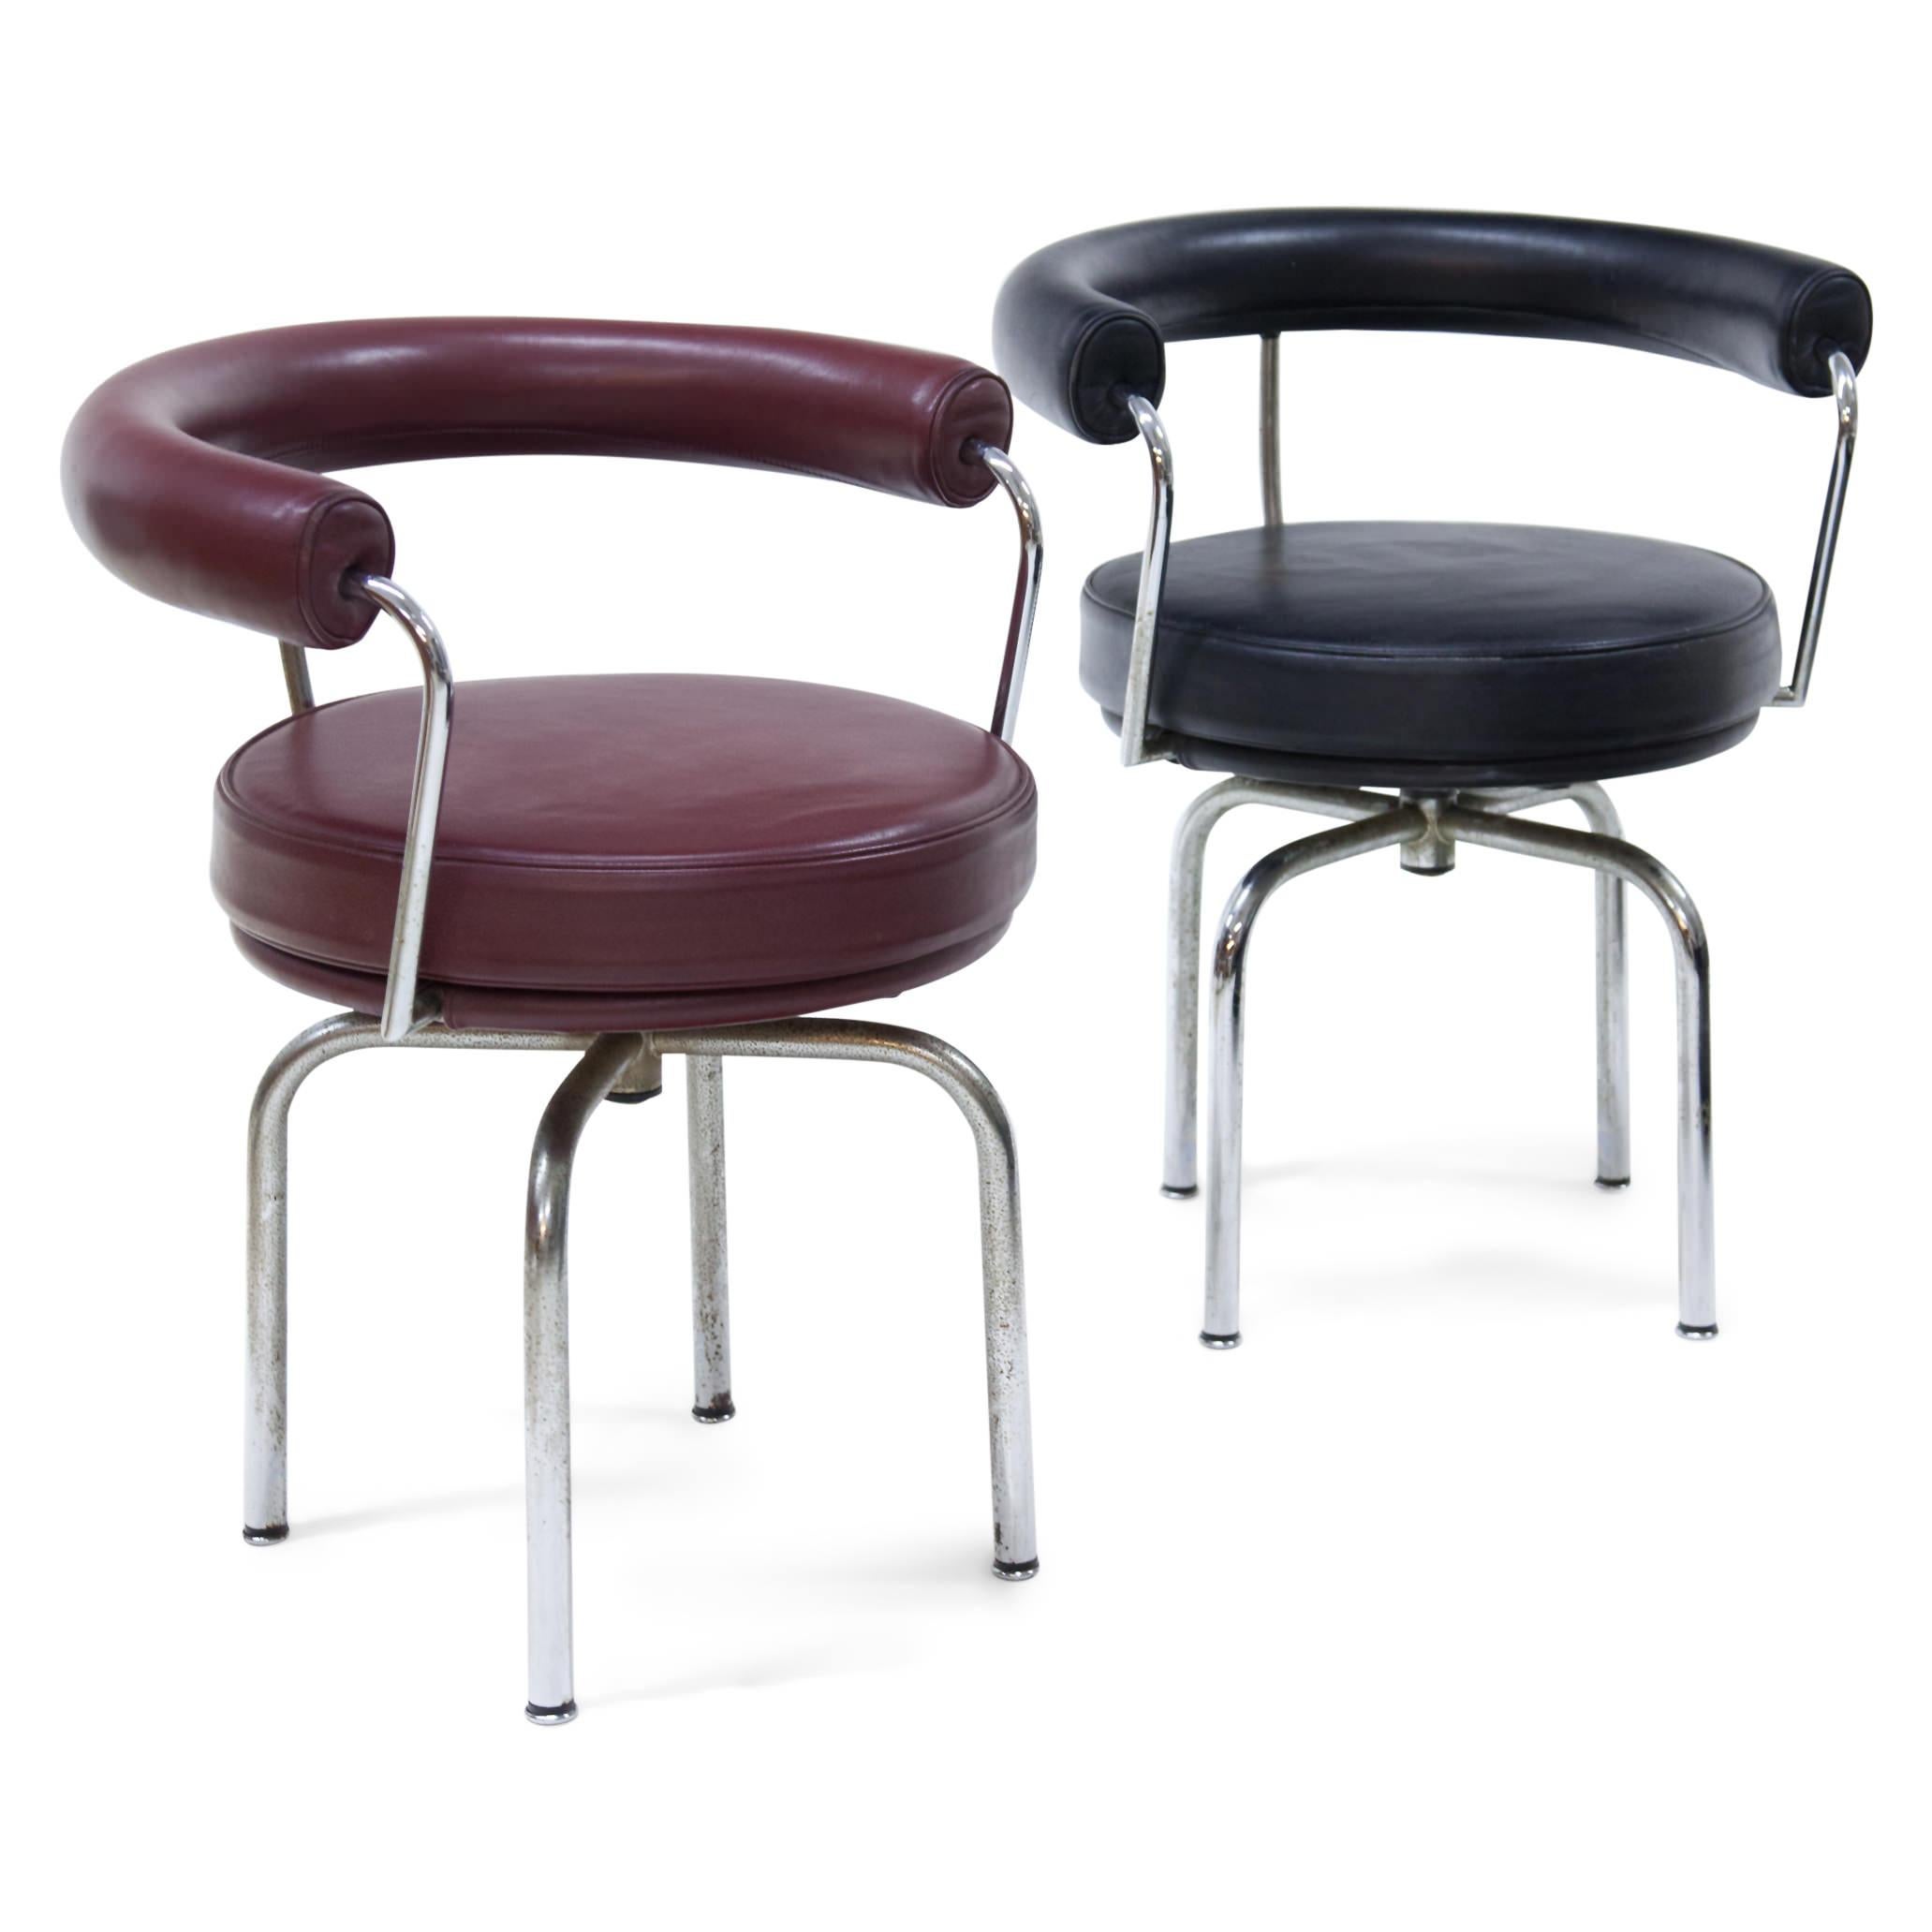 Mid-Century Modern LC7 Swivel Chairs by Cassina, Tubular Steel, 1970s